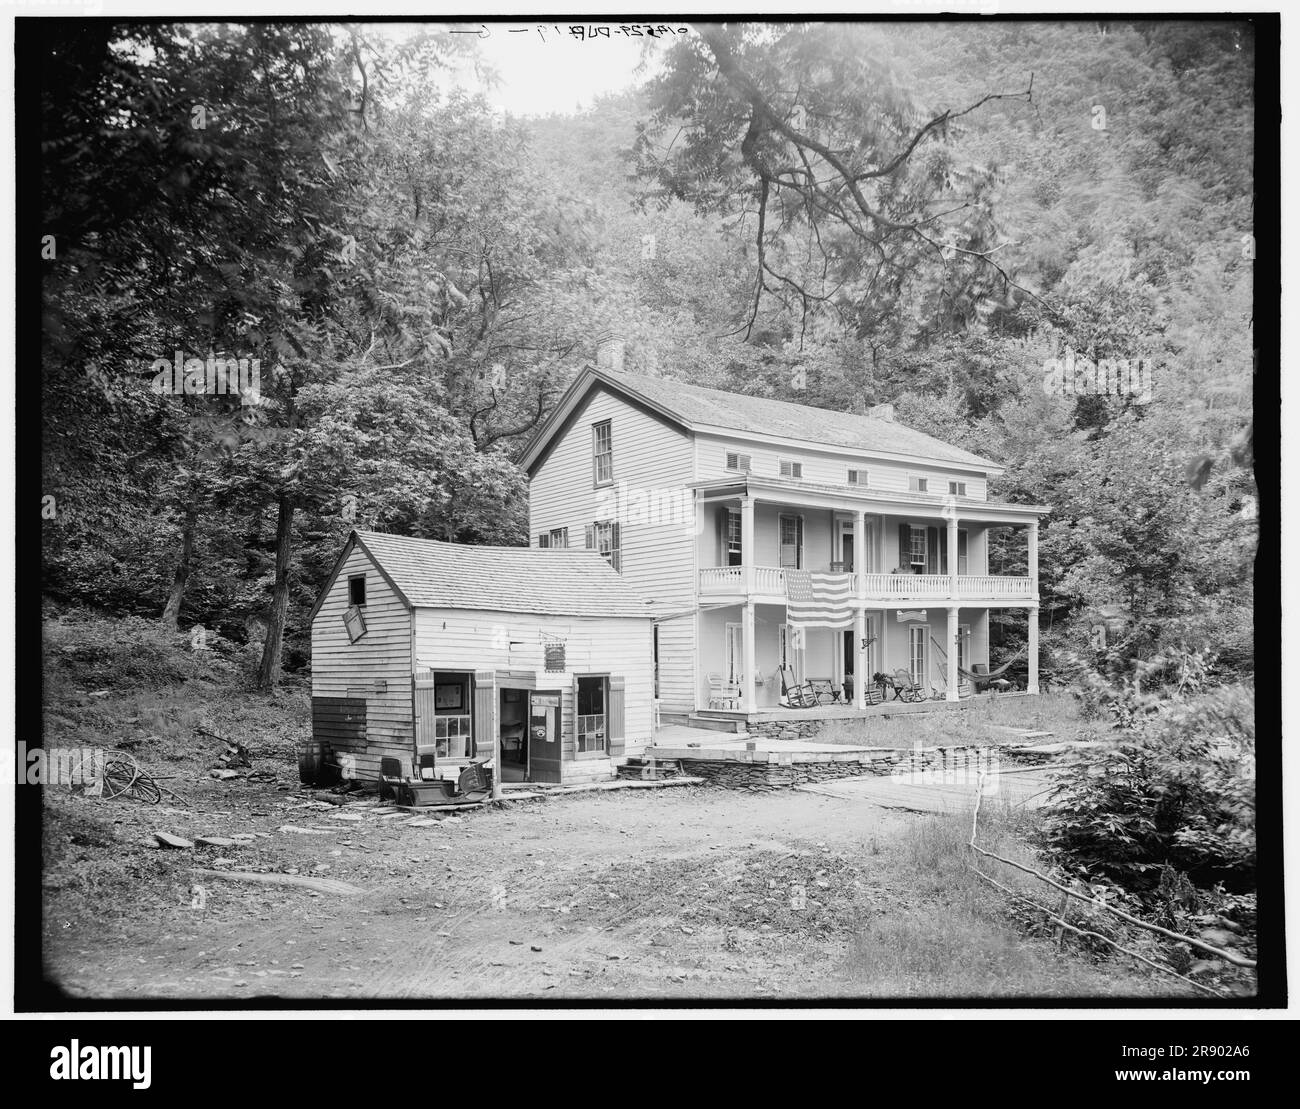 Rip Van Winkle House, Sleepy Hollow, Catskill Mountains, N.Y., c1902. Rip Van Winkle Hotel and gift shop selling 'beers'. Tourist attraction exploiting the geography of a ravine resembling the one described in the story of &quot;Rip Van Winkle&quot; by American author Washington Irving. The buildings were abandoned and later burned down after the Otis Elevating Railway was built. Stock Photo